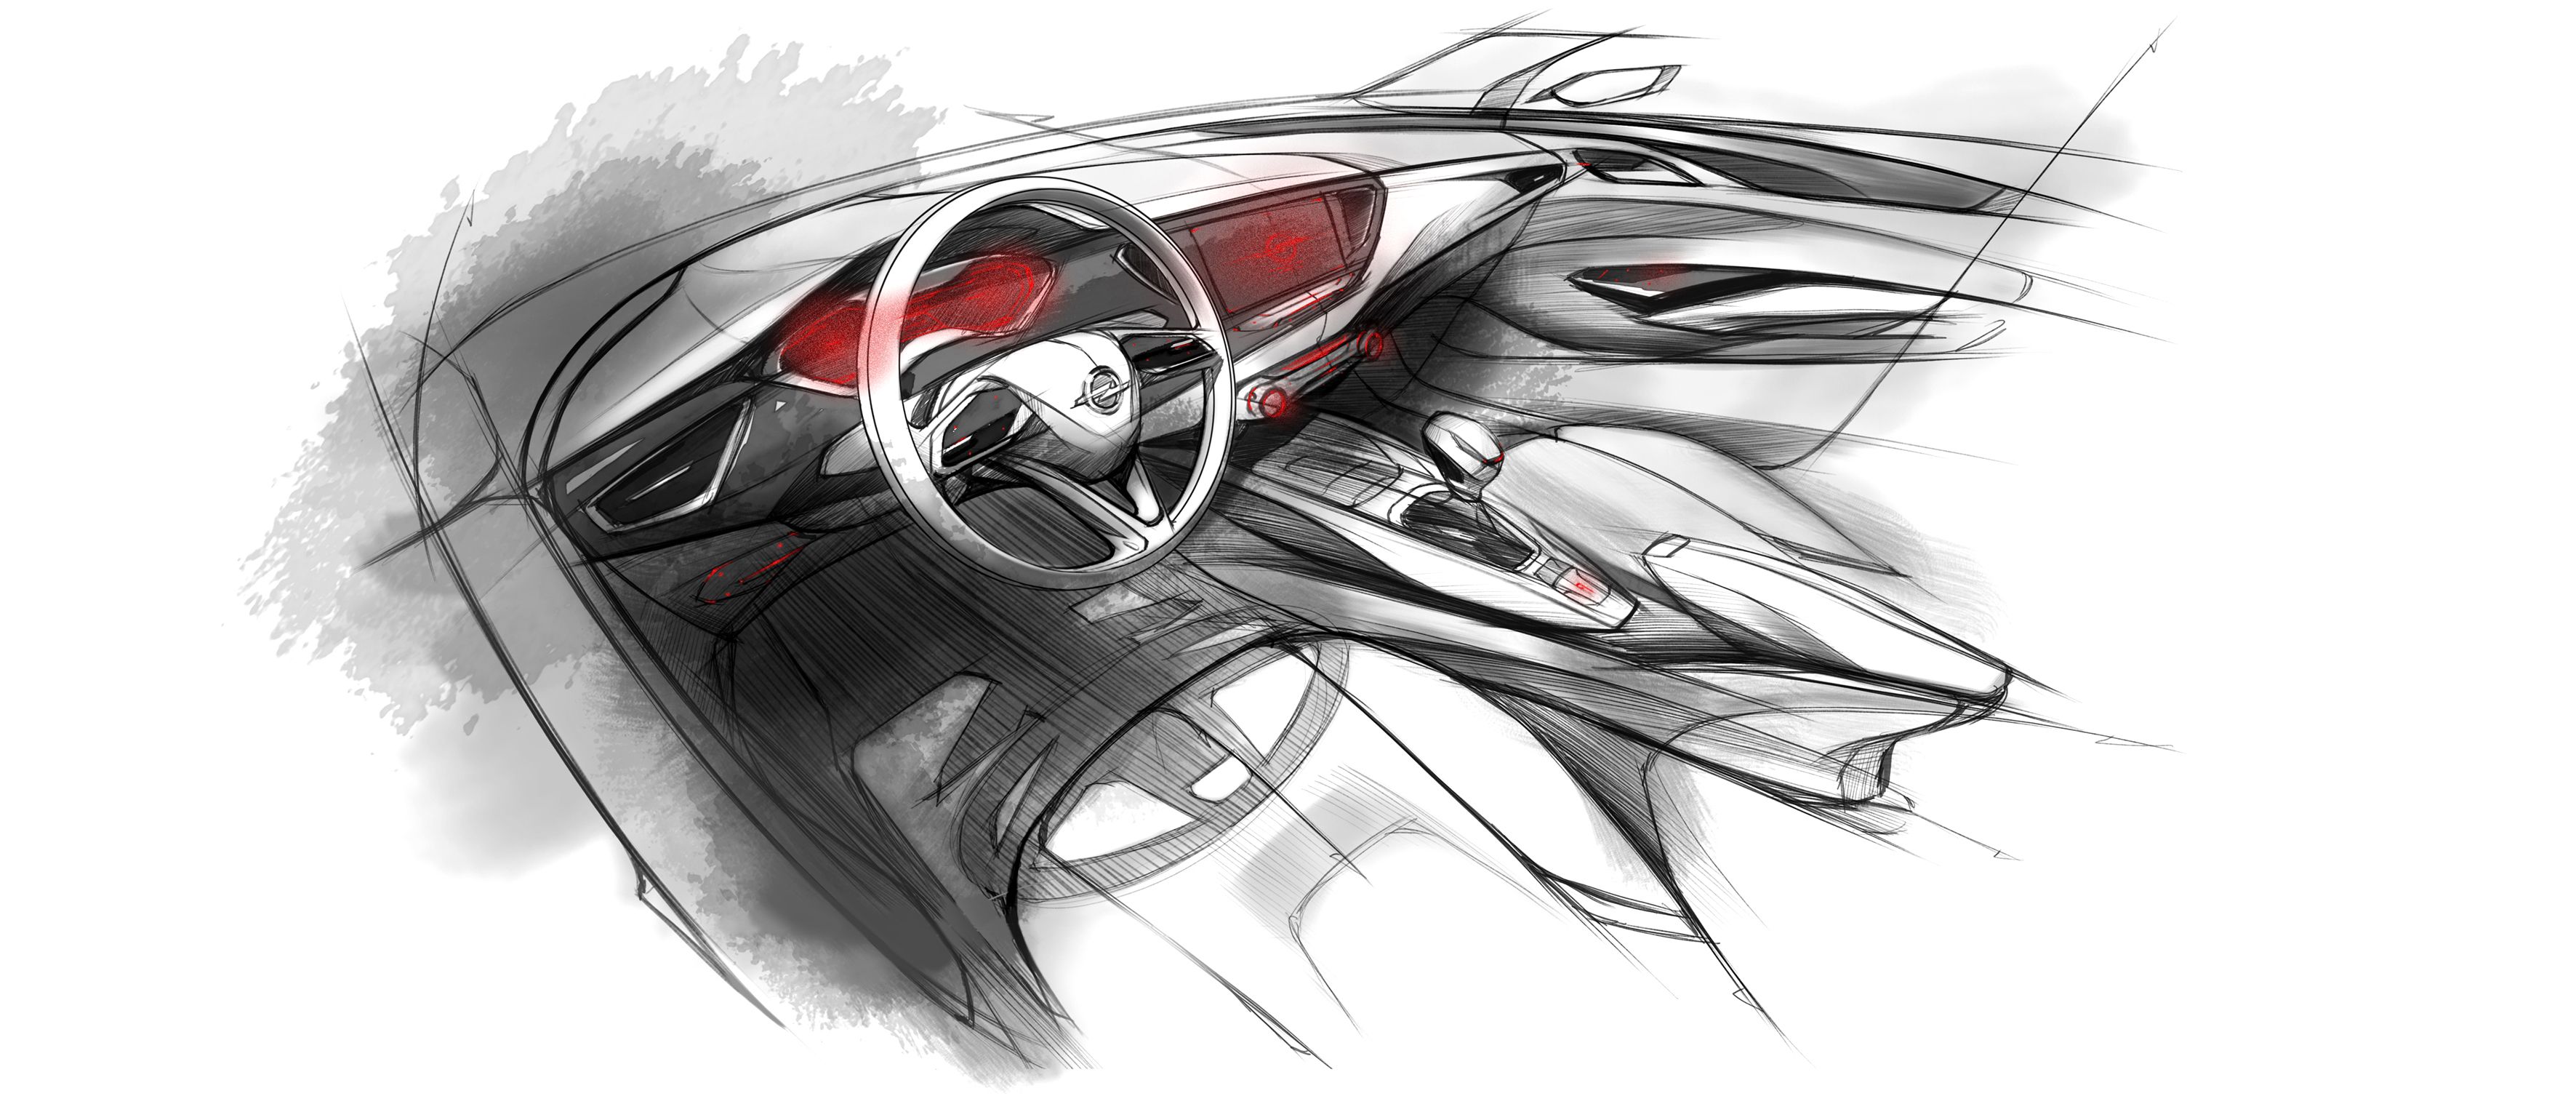 Wallpaper, drawing, illustration, monochrome, anime, Opel, netcarshow, netcar, car image, car photo, Astra, wing, sketch, automotive design 3543x1518